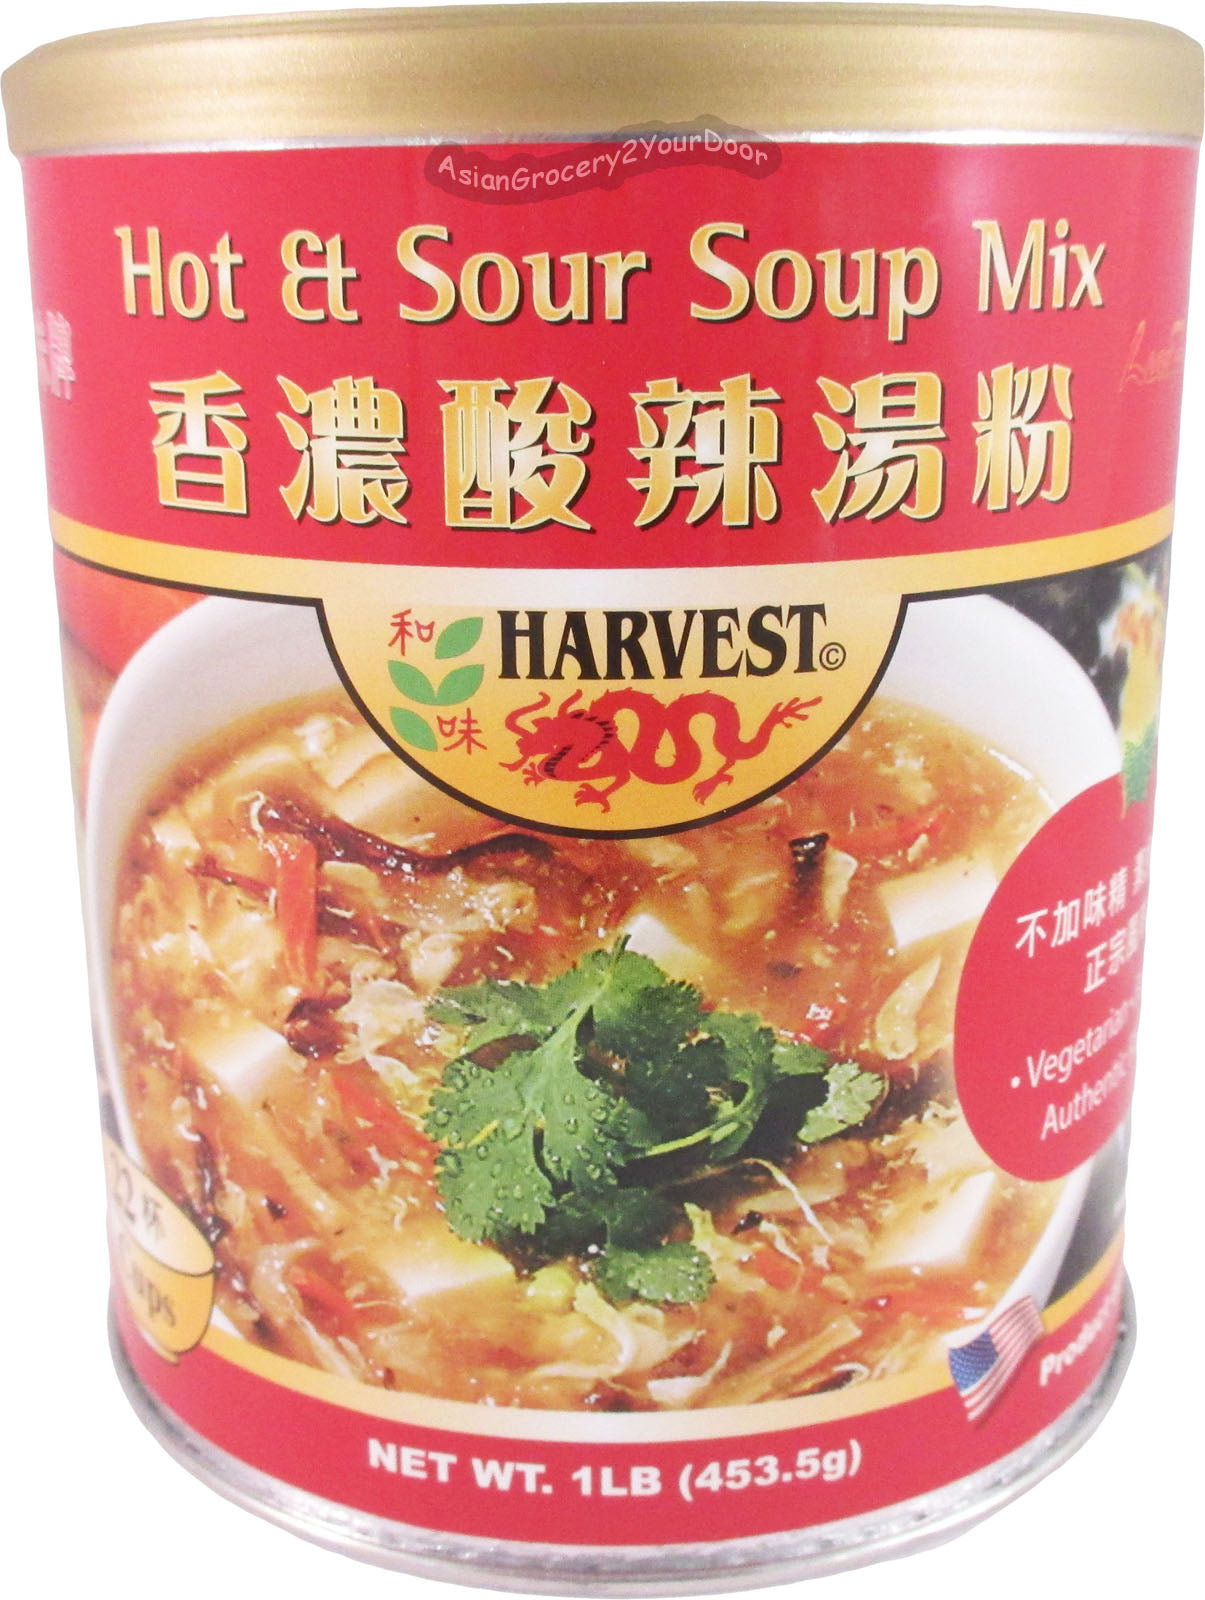 Harvest Hot & Sour Soup Mix - AsianGrocery2YourDoor– Asiangrocery2yourdoor